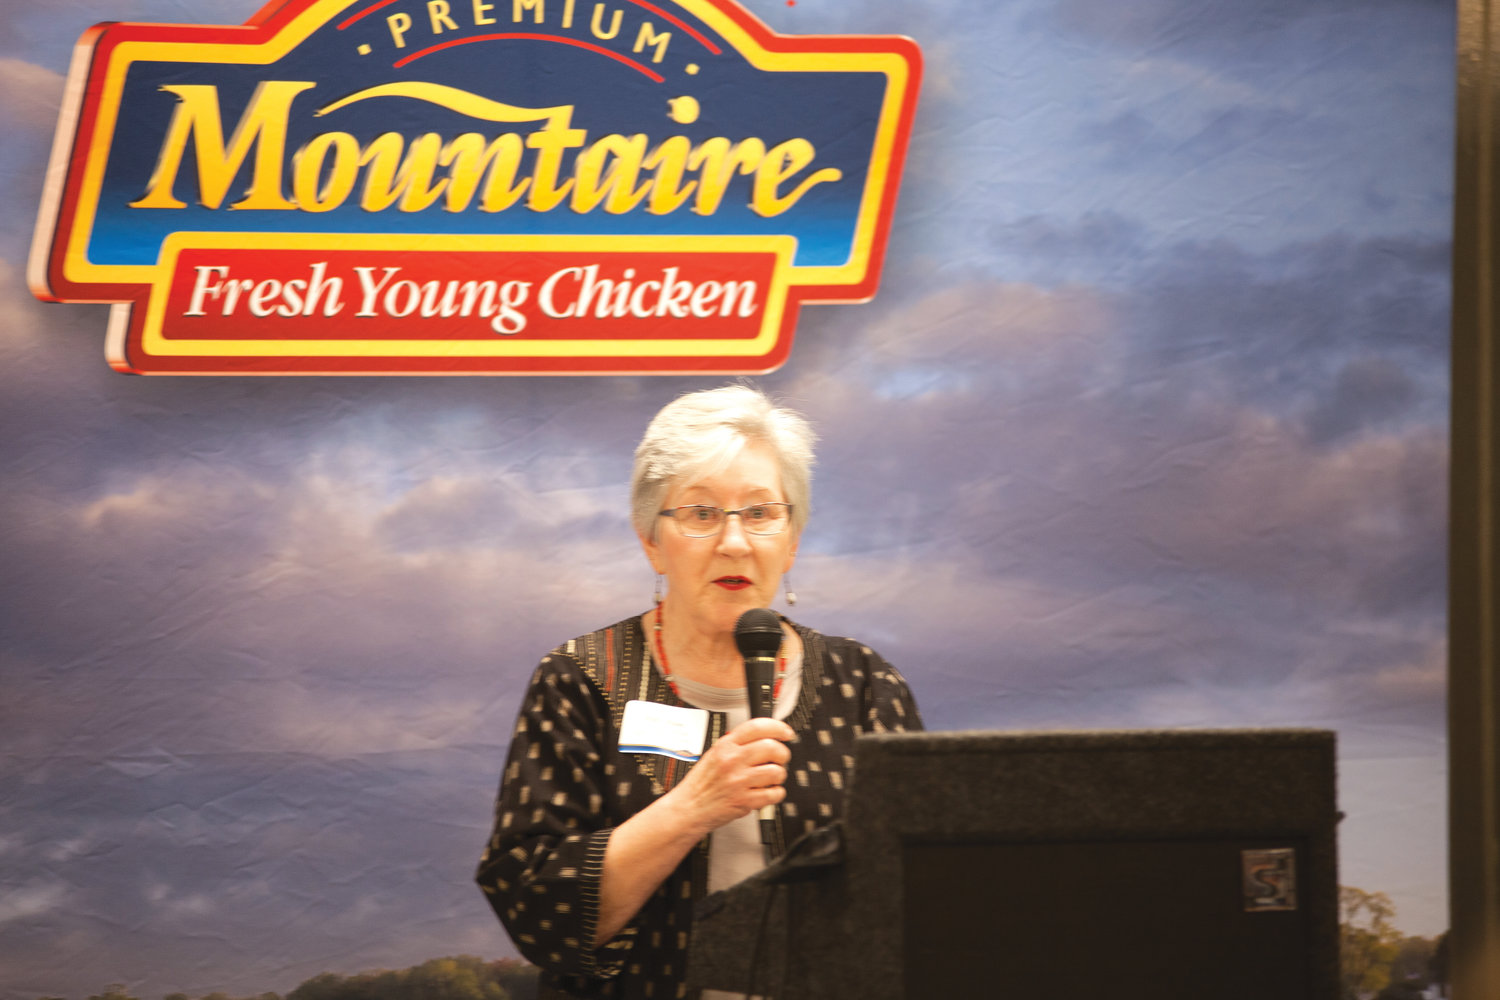 County Commisioner Diana Hales thanked Mountaire Farms for the "dignity of work" that will follow from the expansion of the plant.